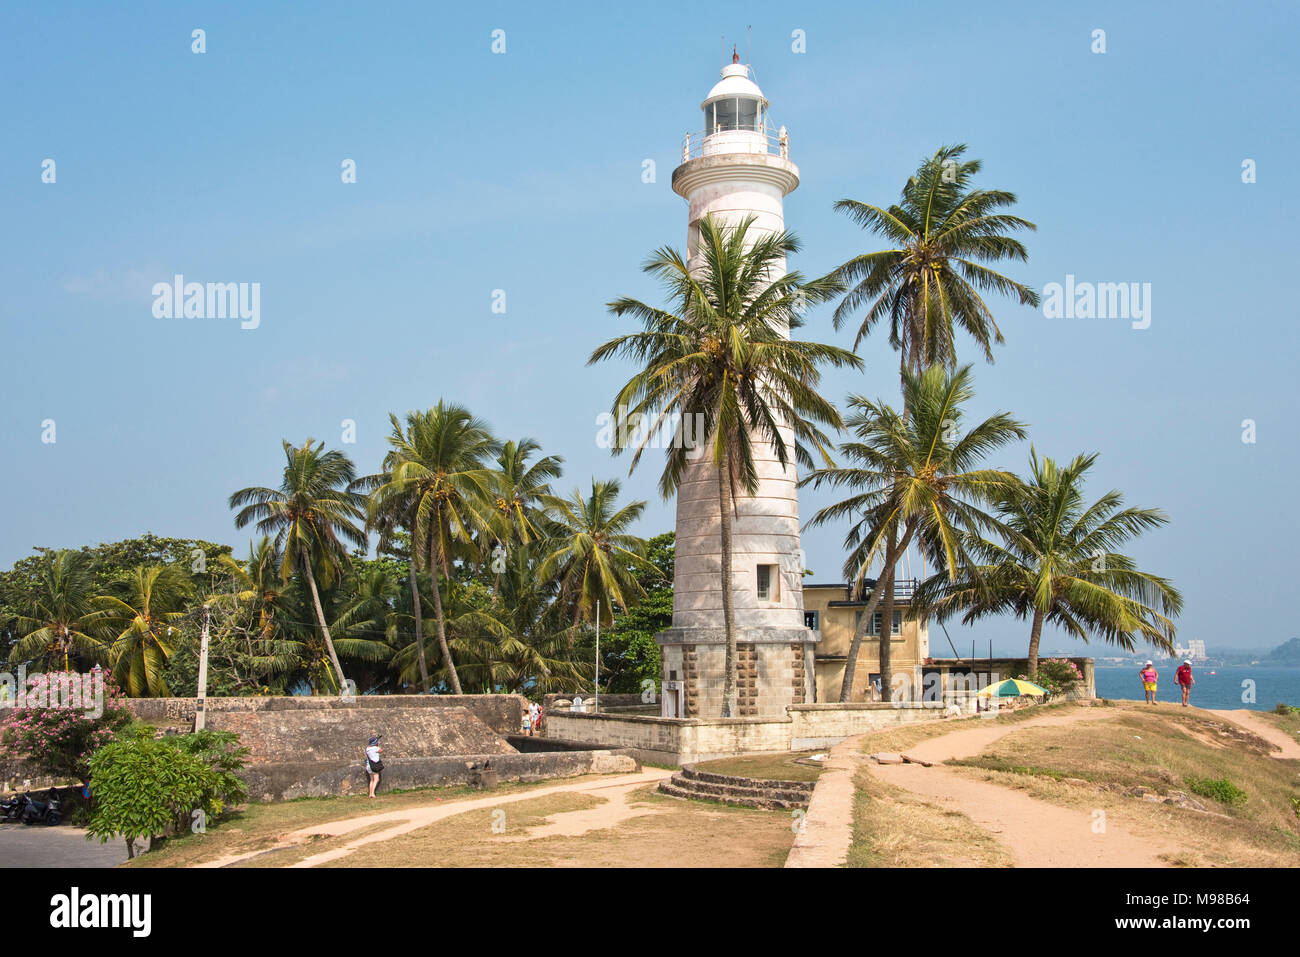 Galle Lighthouse in Sri Lanka with tourists and local people walking around on a sunny day with blue sky. Stock Photo